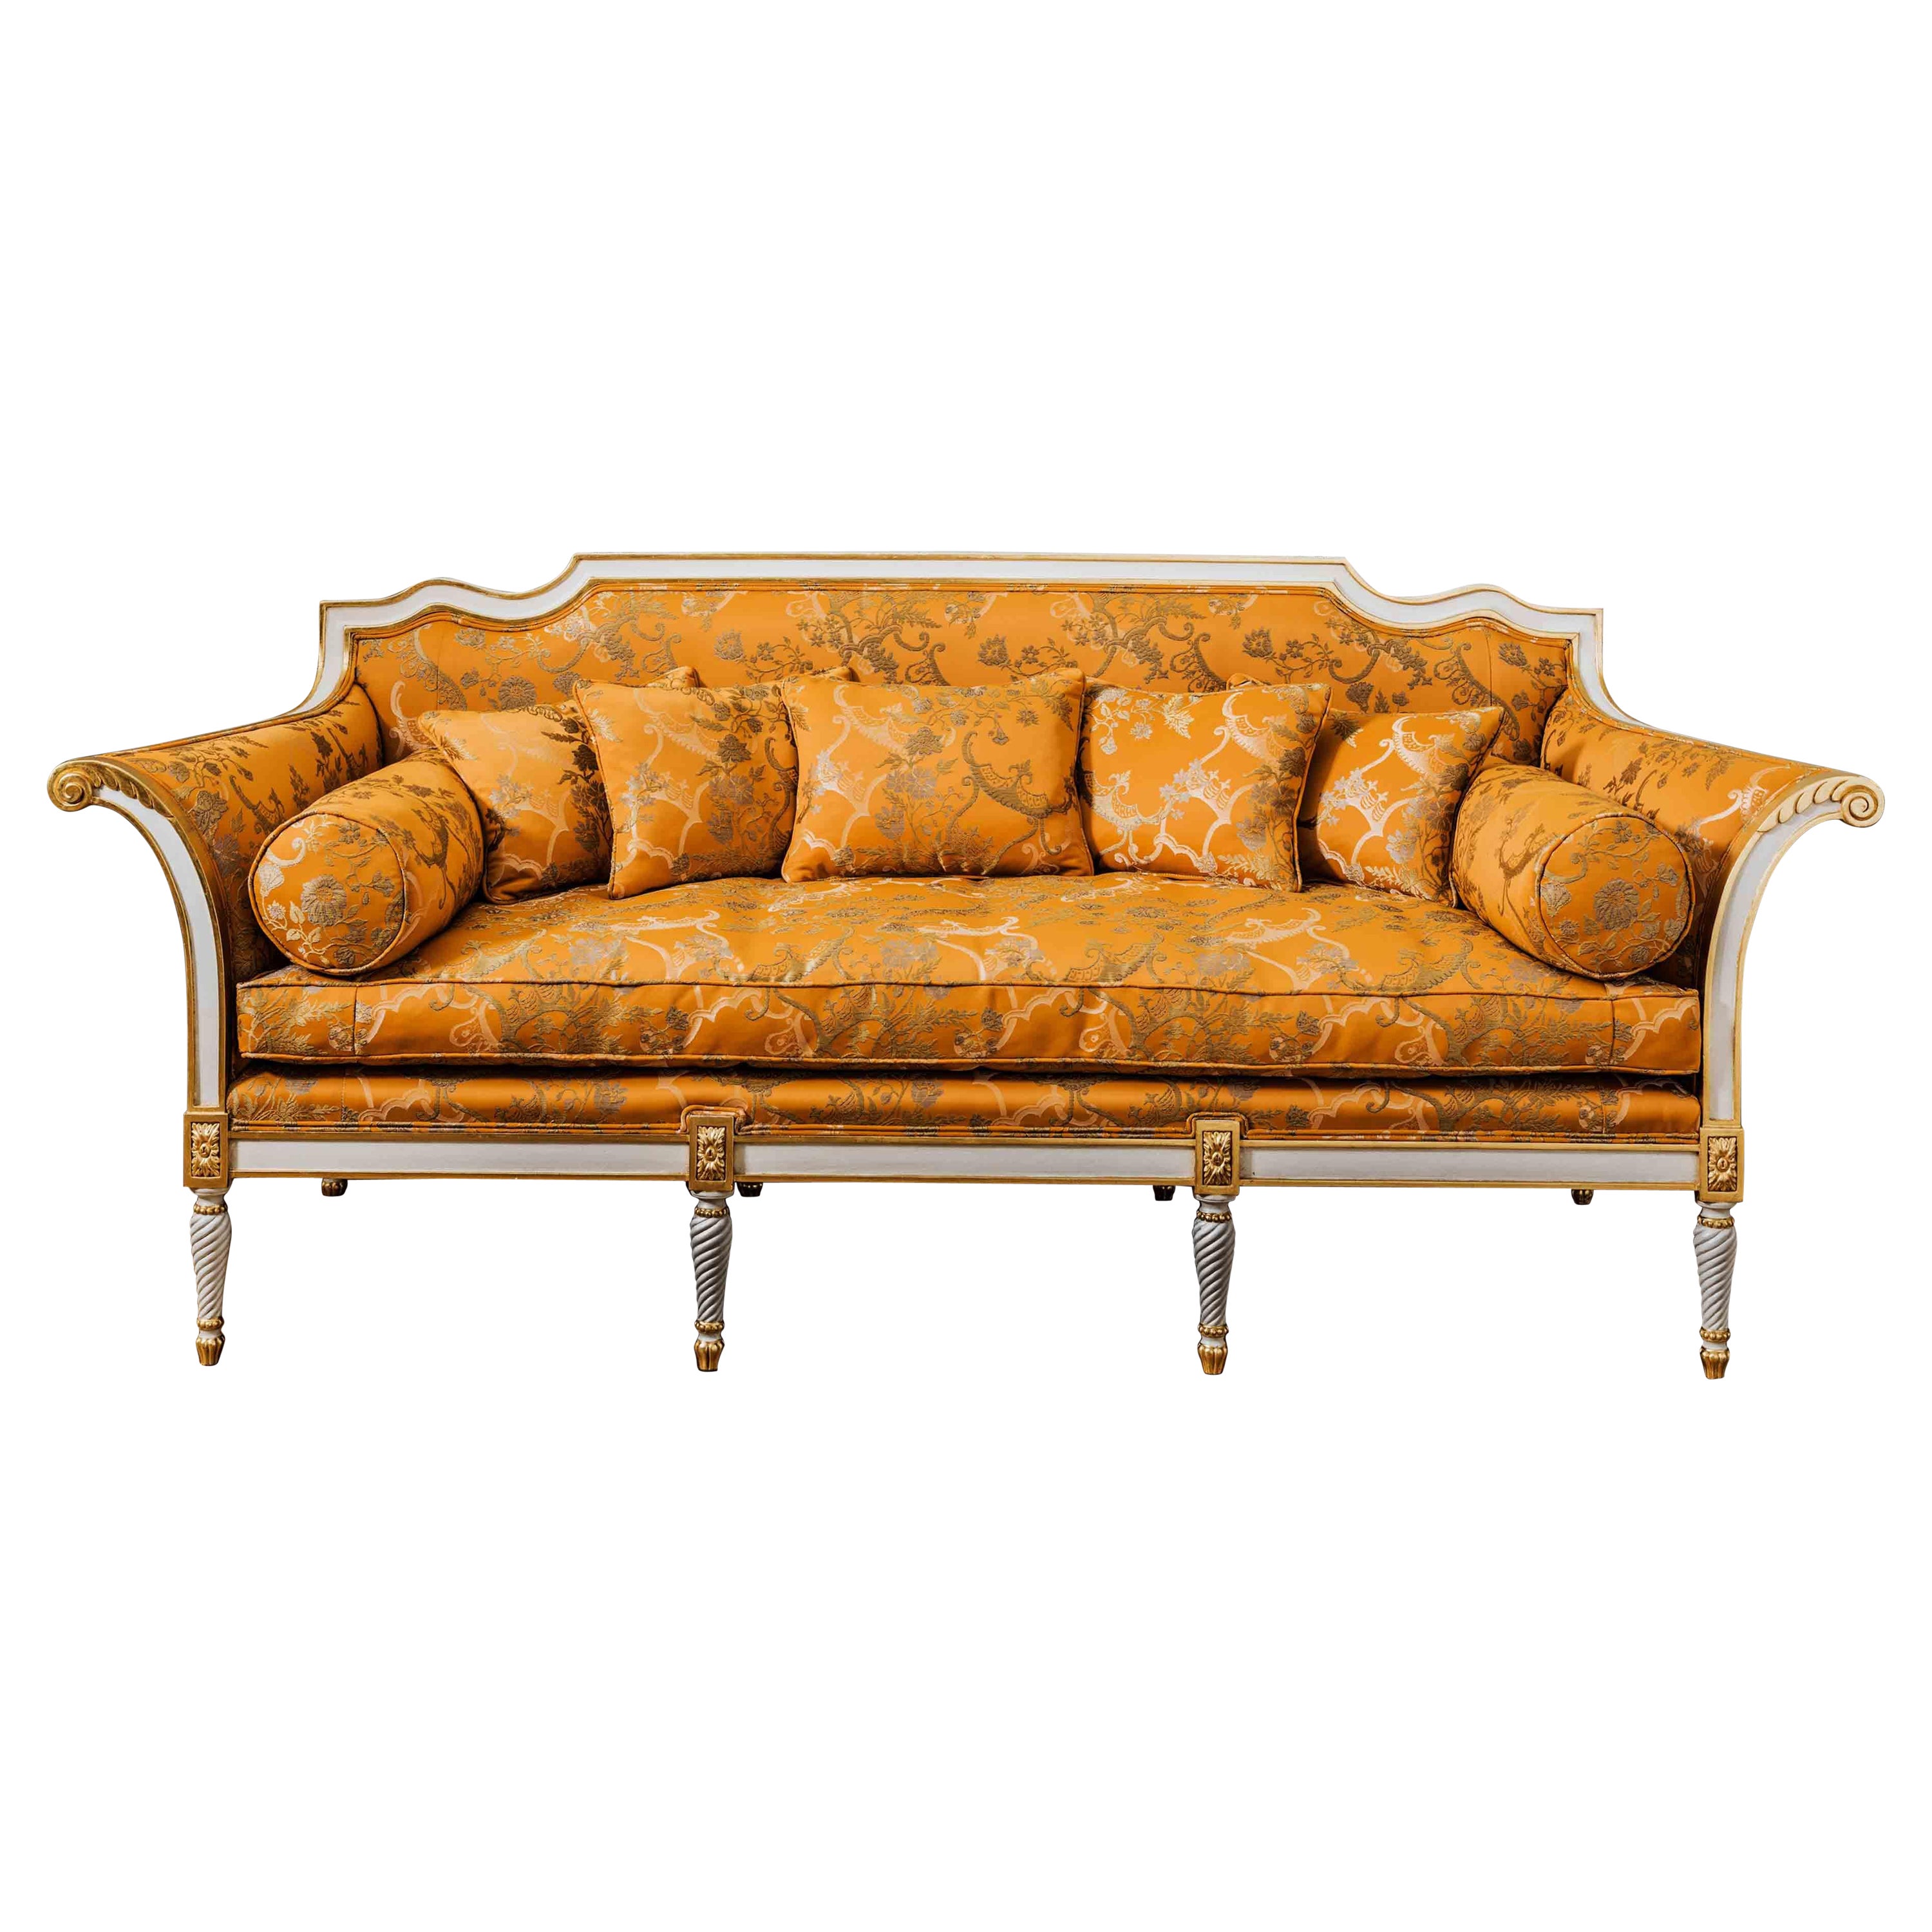 French Louis XVI Period Style Sofa with Scroll Arms Made by La Maison  london For Sale at 1stDibs